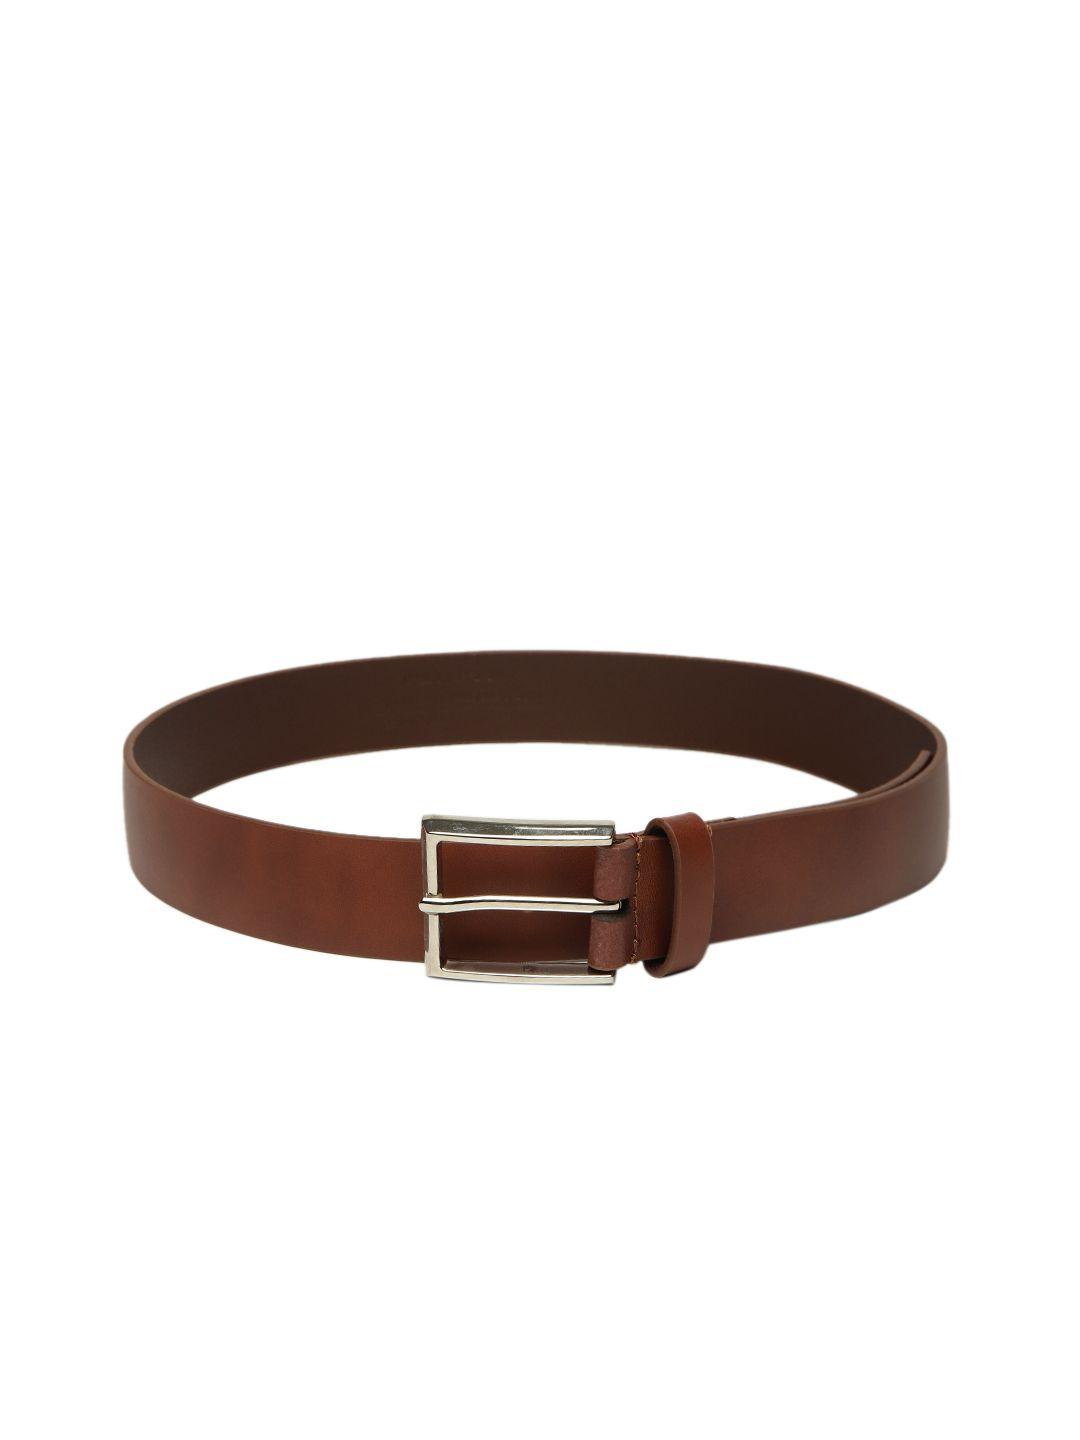 louis-philippe-men-tan-brown-solid-leather-belt